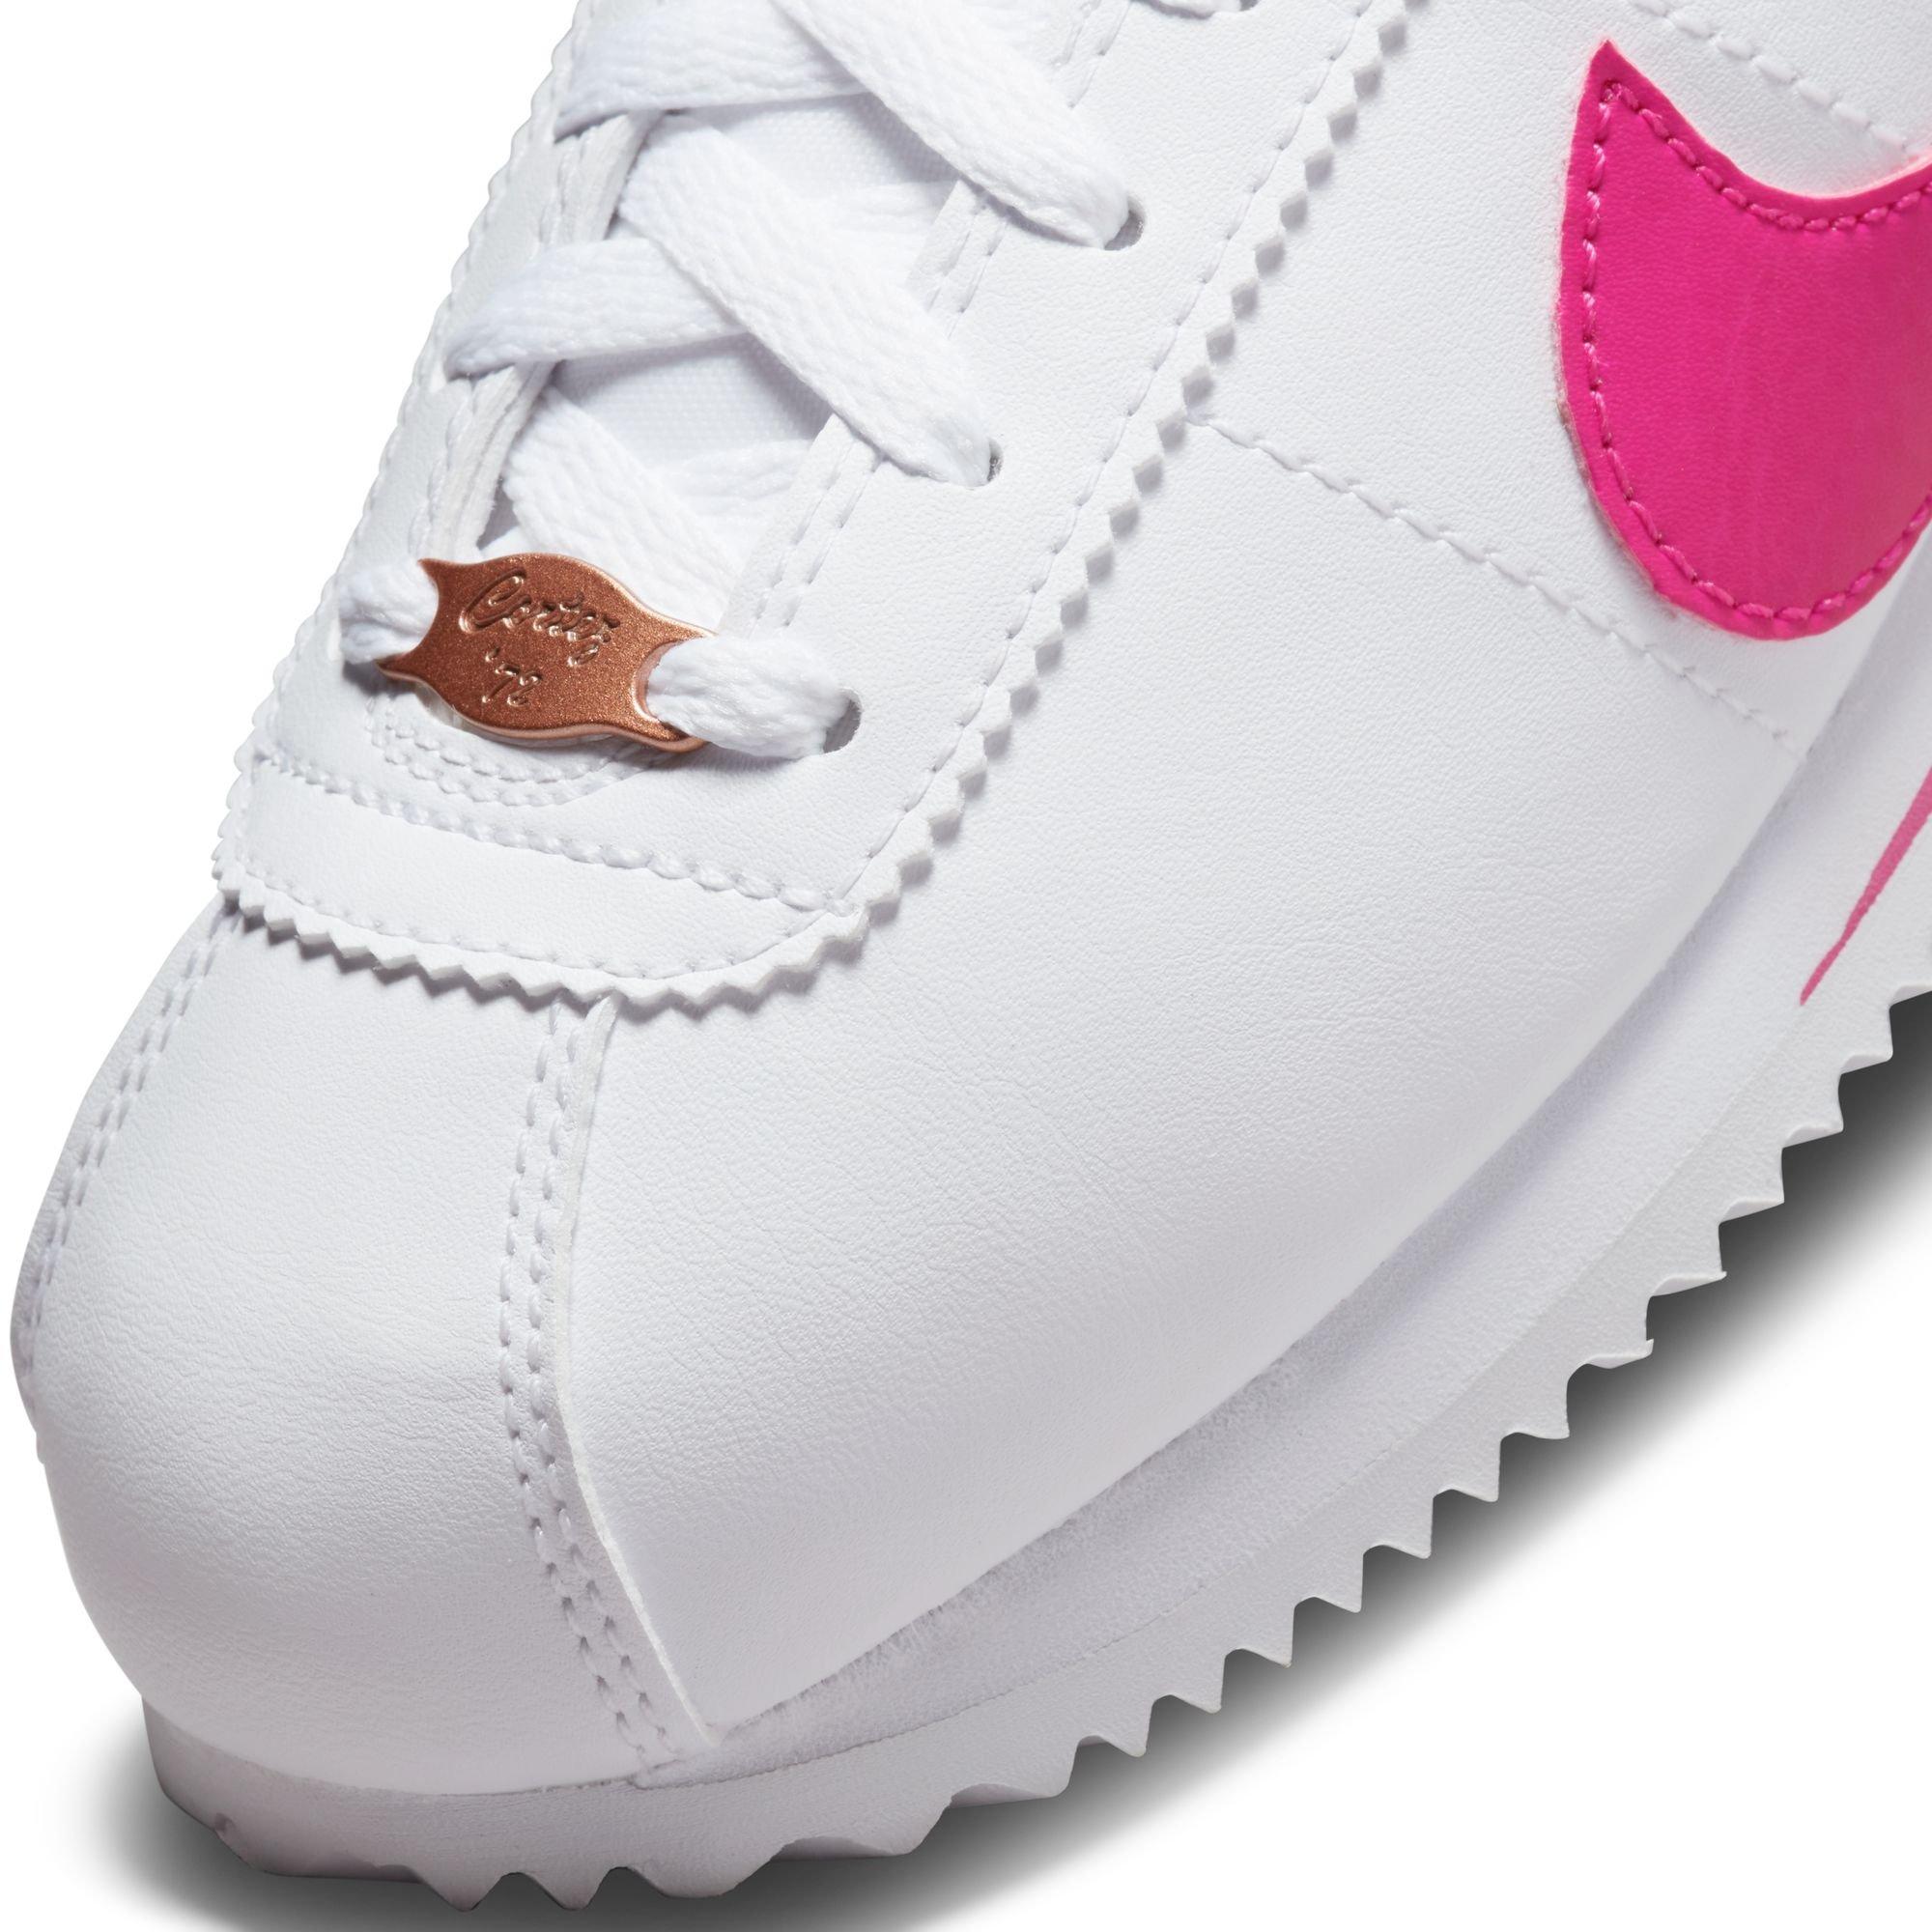 Nike Cortez size 6 Youth / 5.5 Womens White/Pink Shoes 315931-161